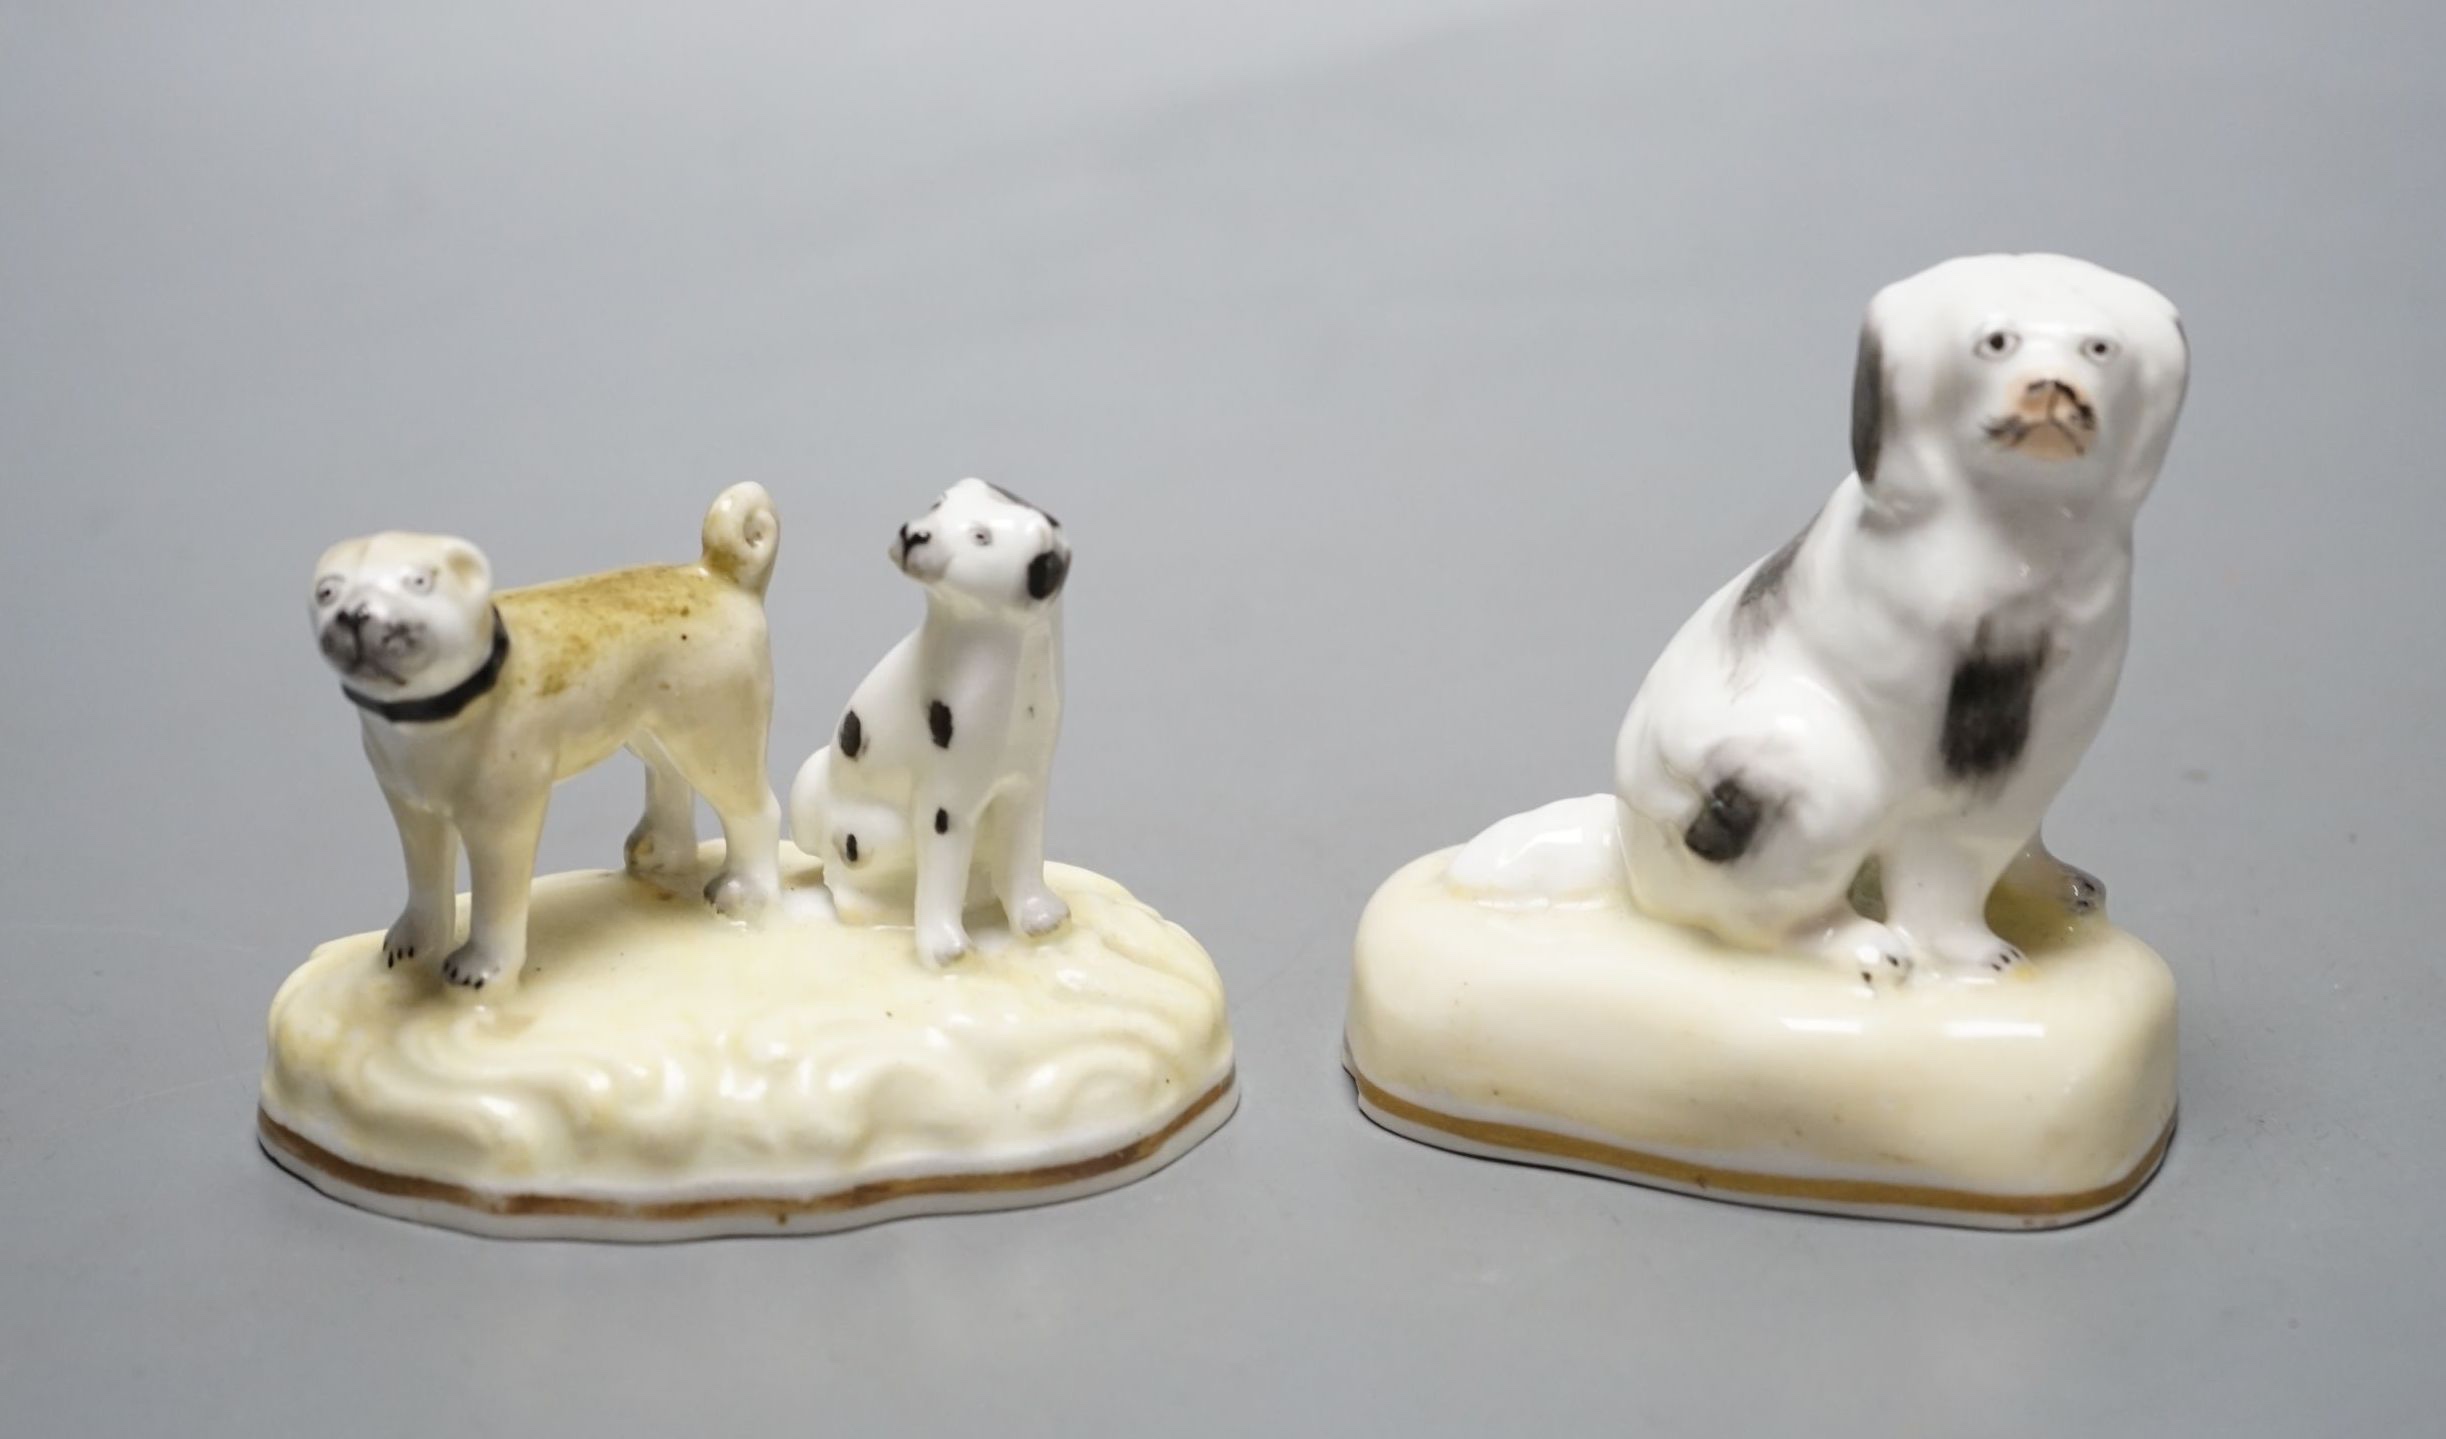 A Samuel Alcock porcelain a group of a pug dog and a spaniel, c.1835-50, together with a similar figure of a seated spaniel, impressed marks 342 and 183. Cf. Dennis G.Rice Dogs in English porcelain, colour plate 36 and f